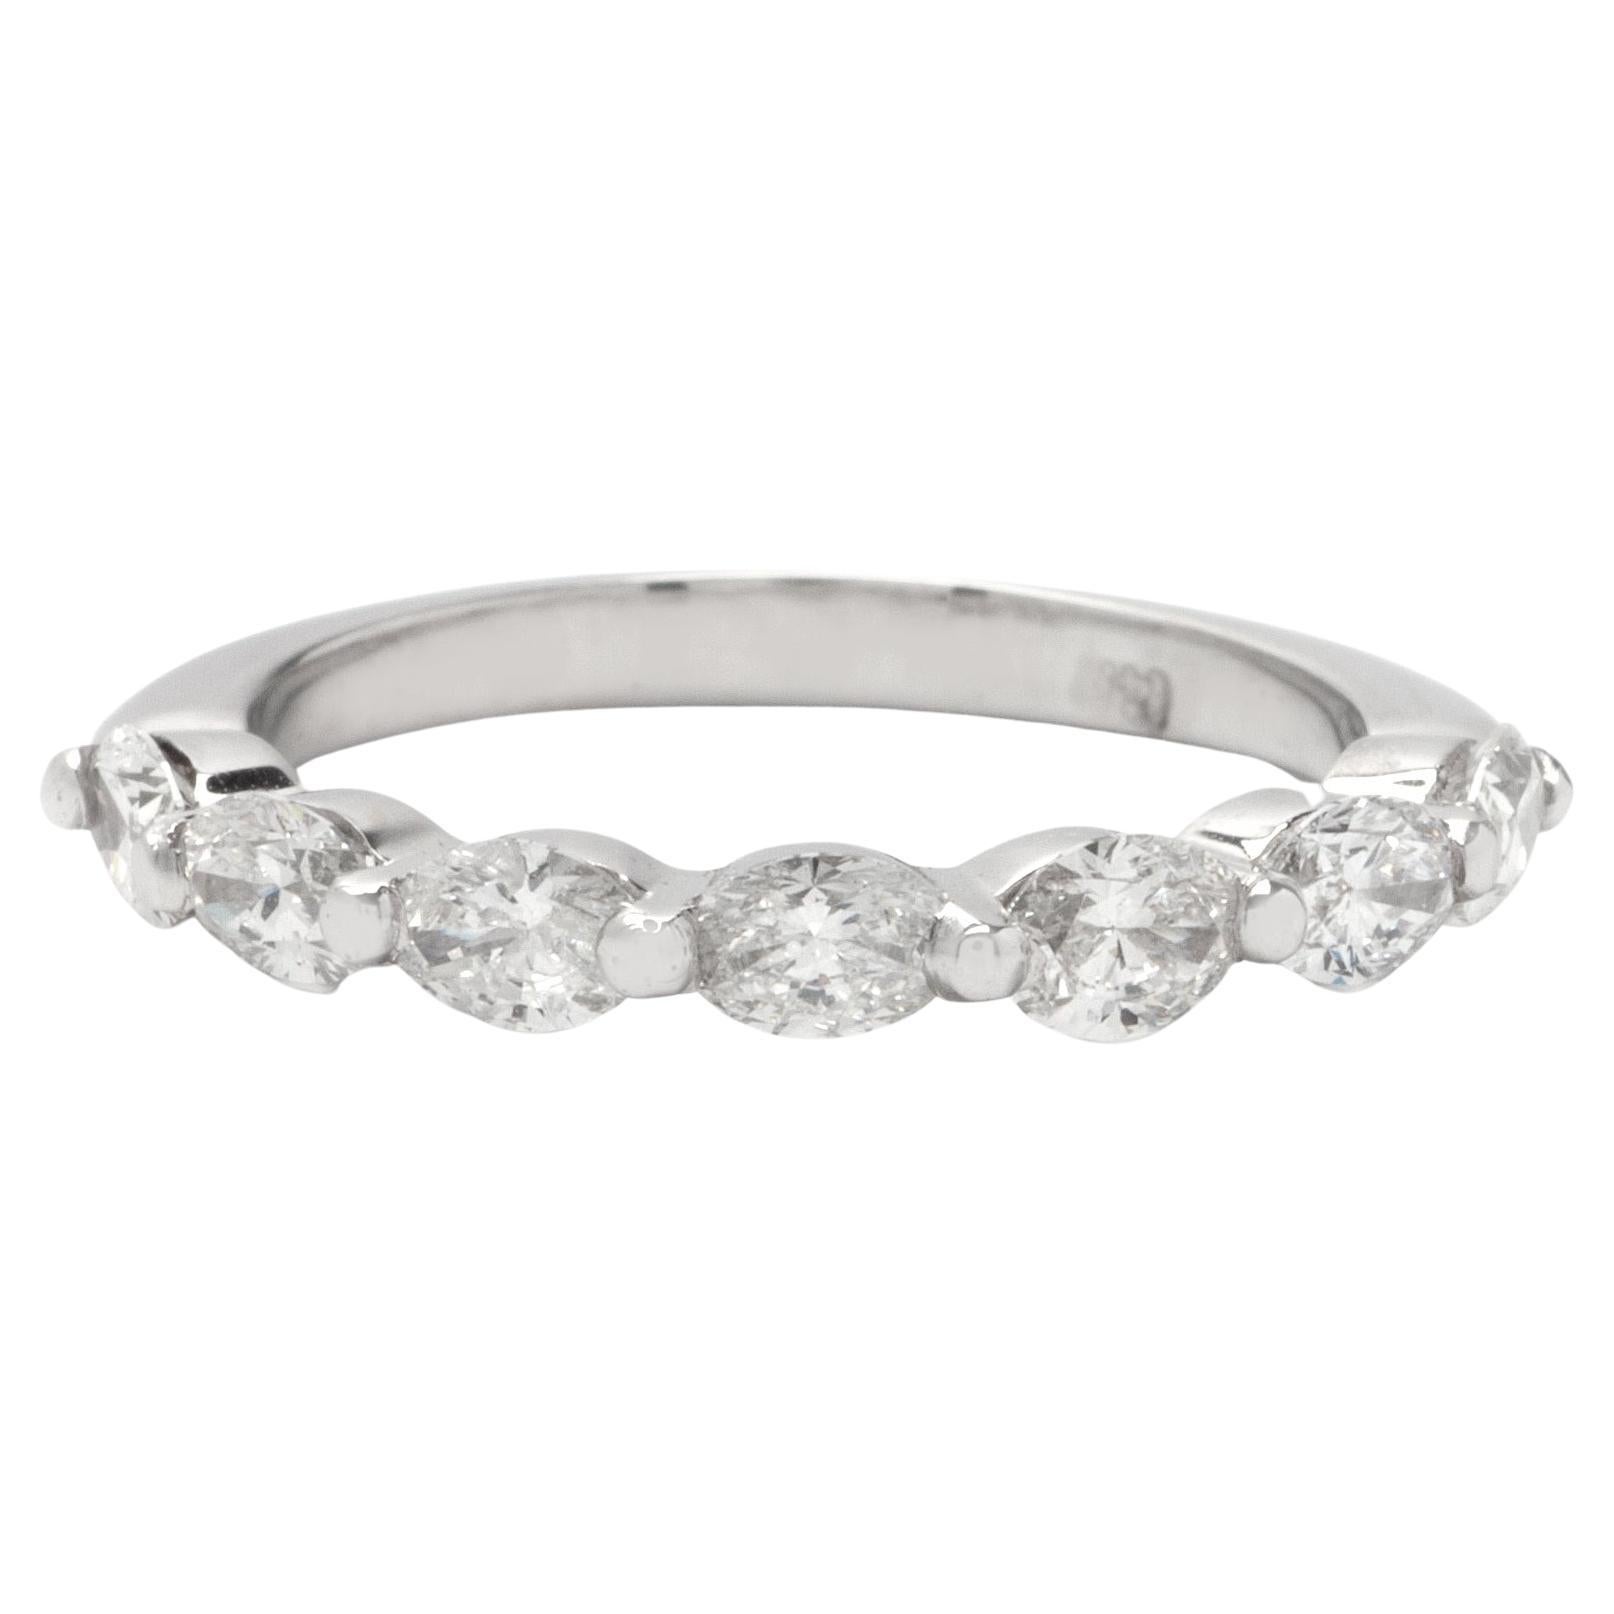 1.00ct Marquise Diamond Band in 14k White Gold